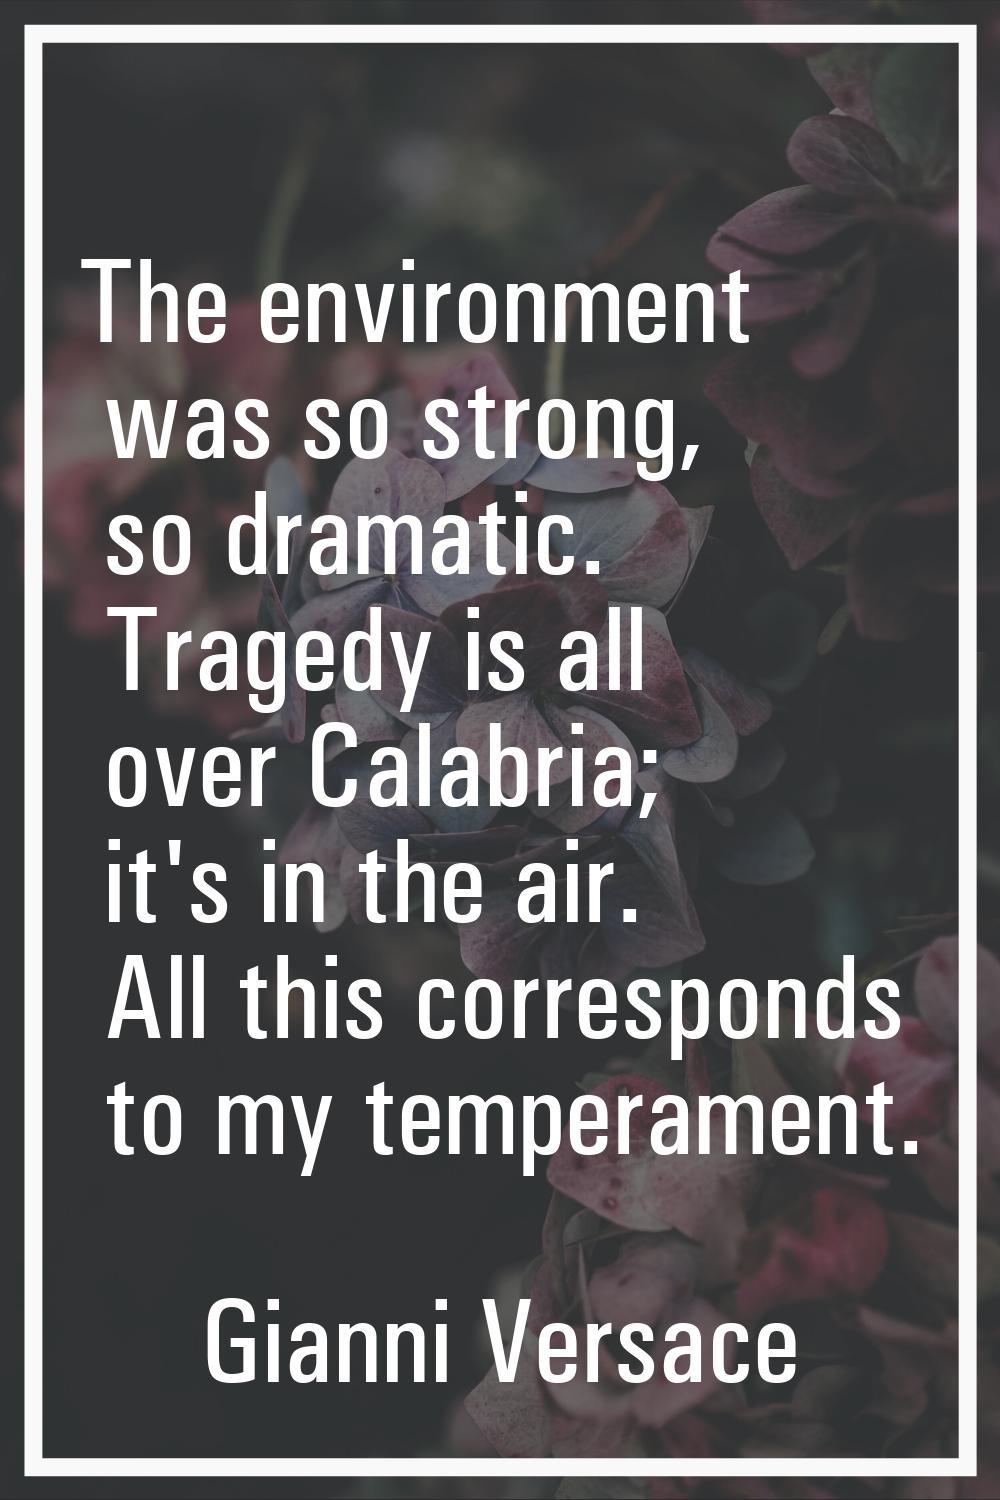 The environment was so strong, so dramatic. Tragedy is all over Calabria; it's in the air. All this